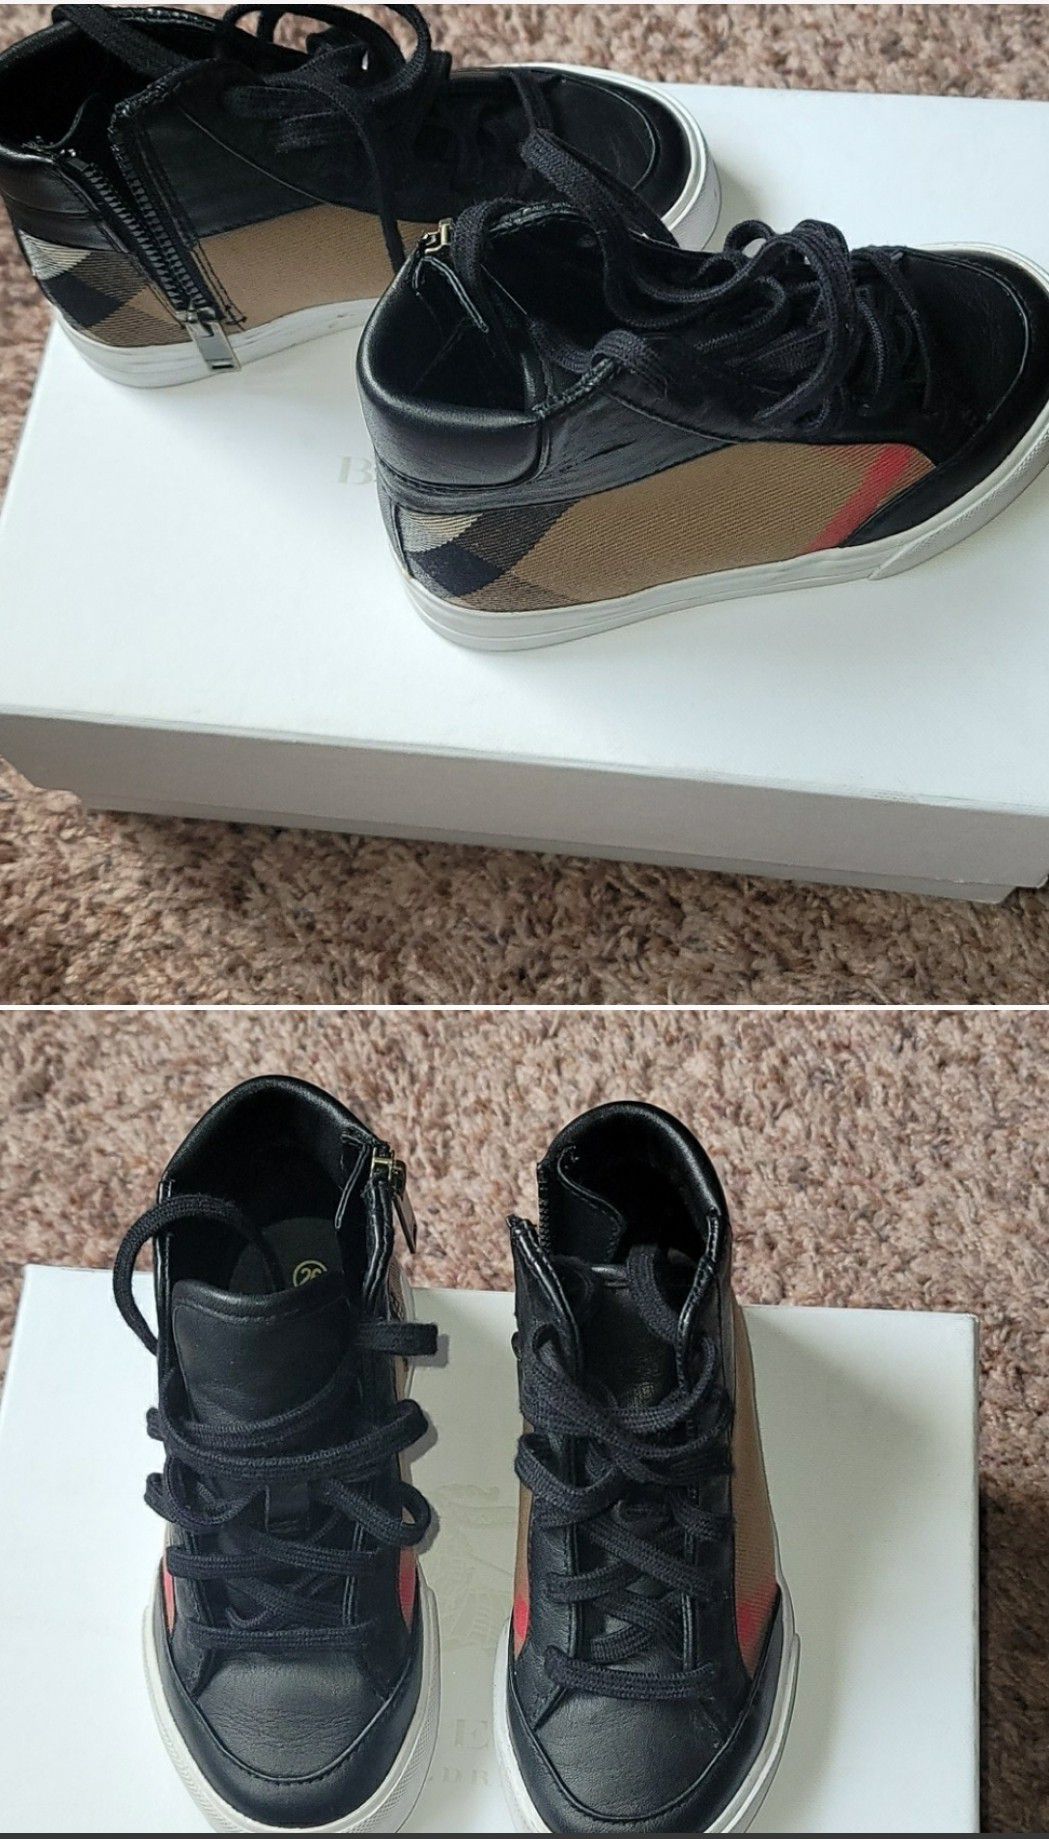 Burberry kids shoes size 26/9.5